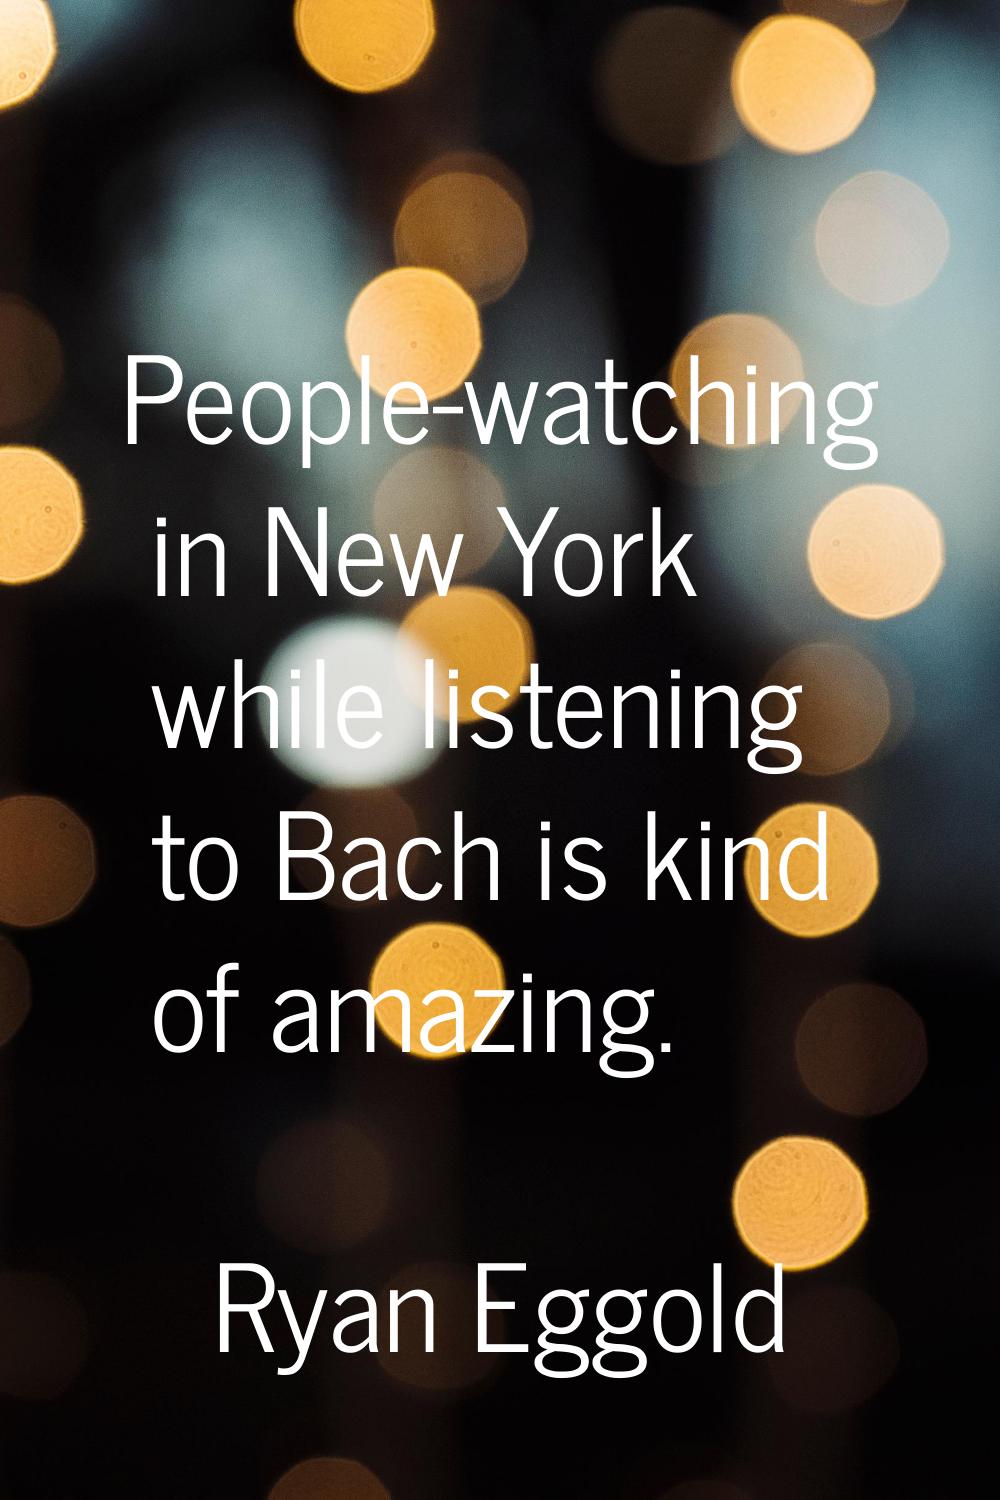 People-watching in New York while listening to Bach is kind of amazing.